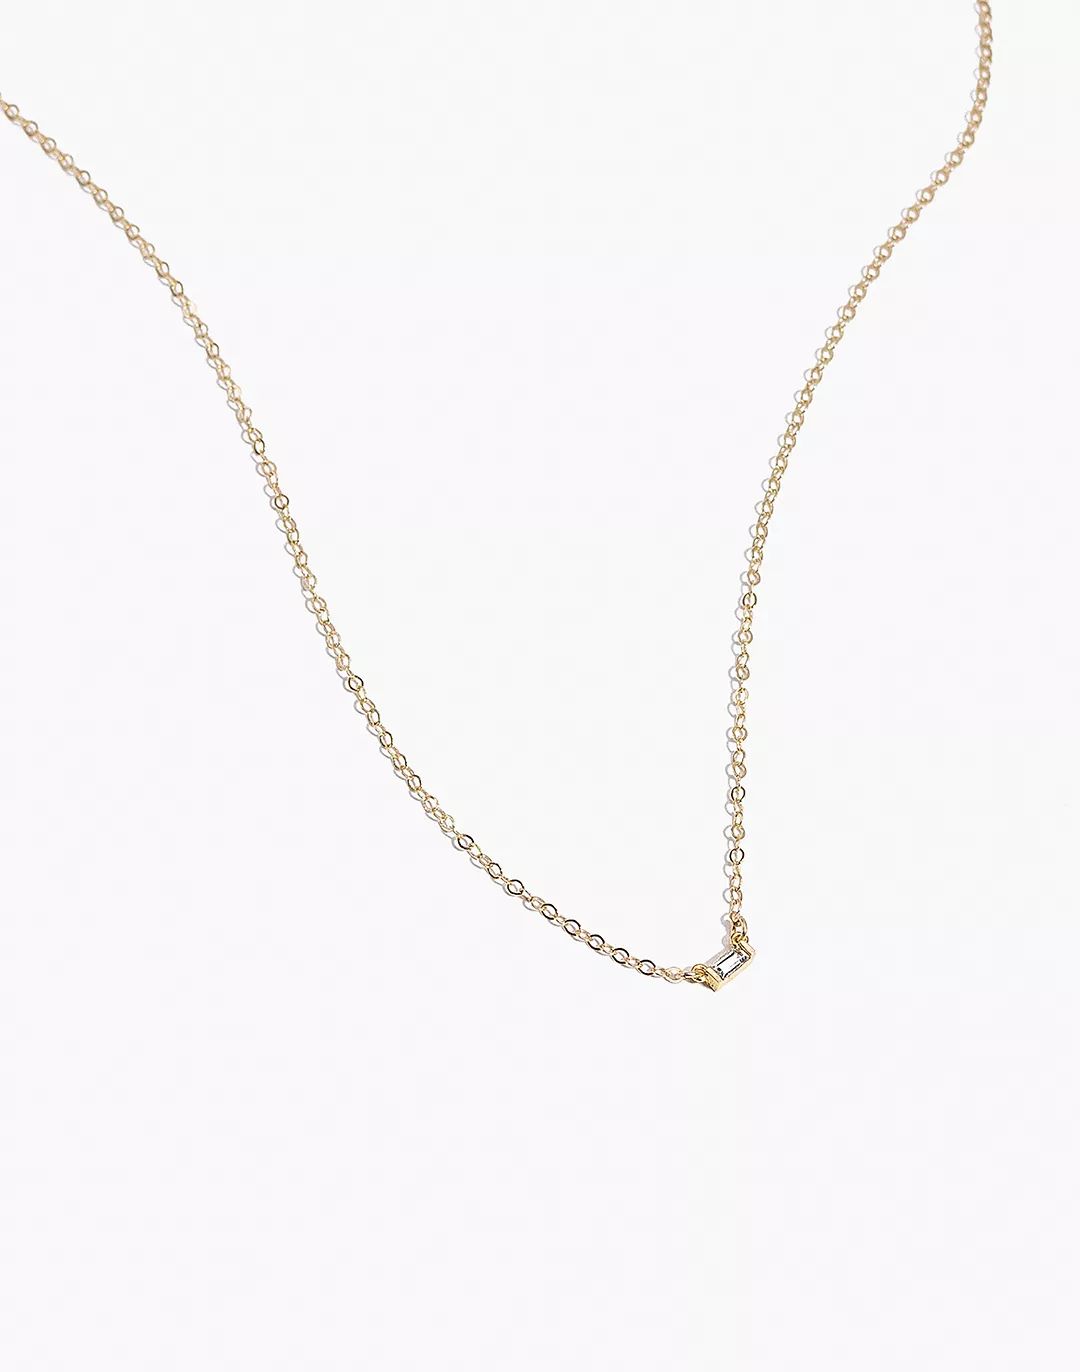 Katie Dean Jewelry™ Baguette Necklace | Madewell